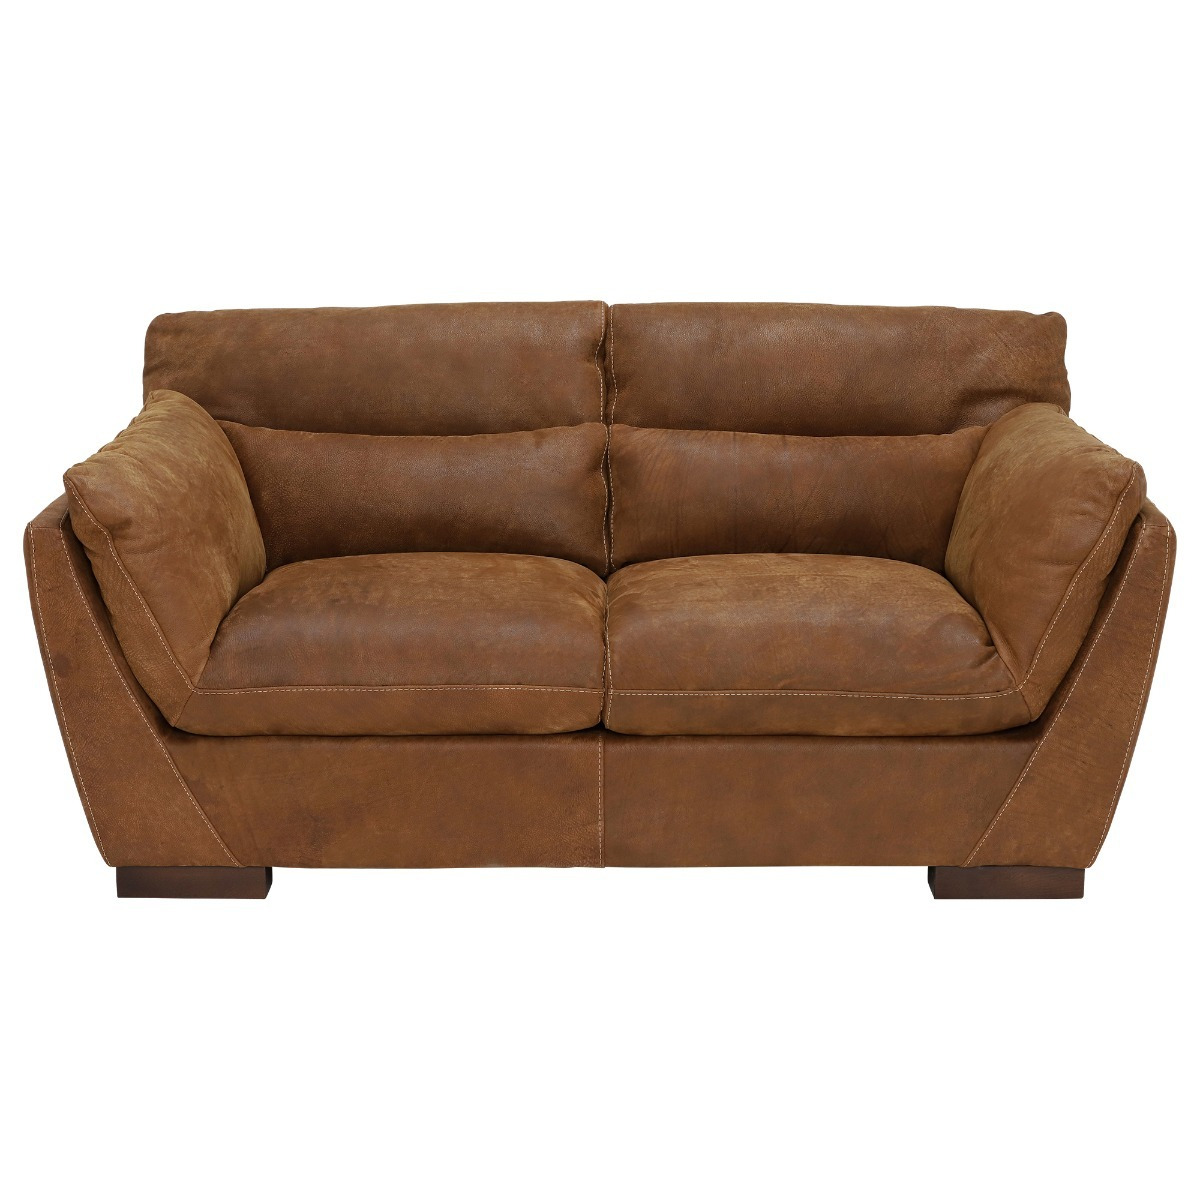 Marnie Loveseat Sofa, Brown Leather - Barker & Stonehouse - image 1